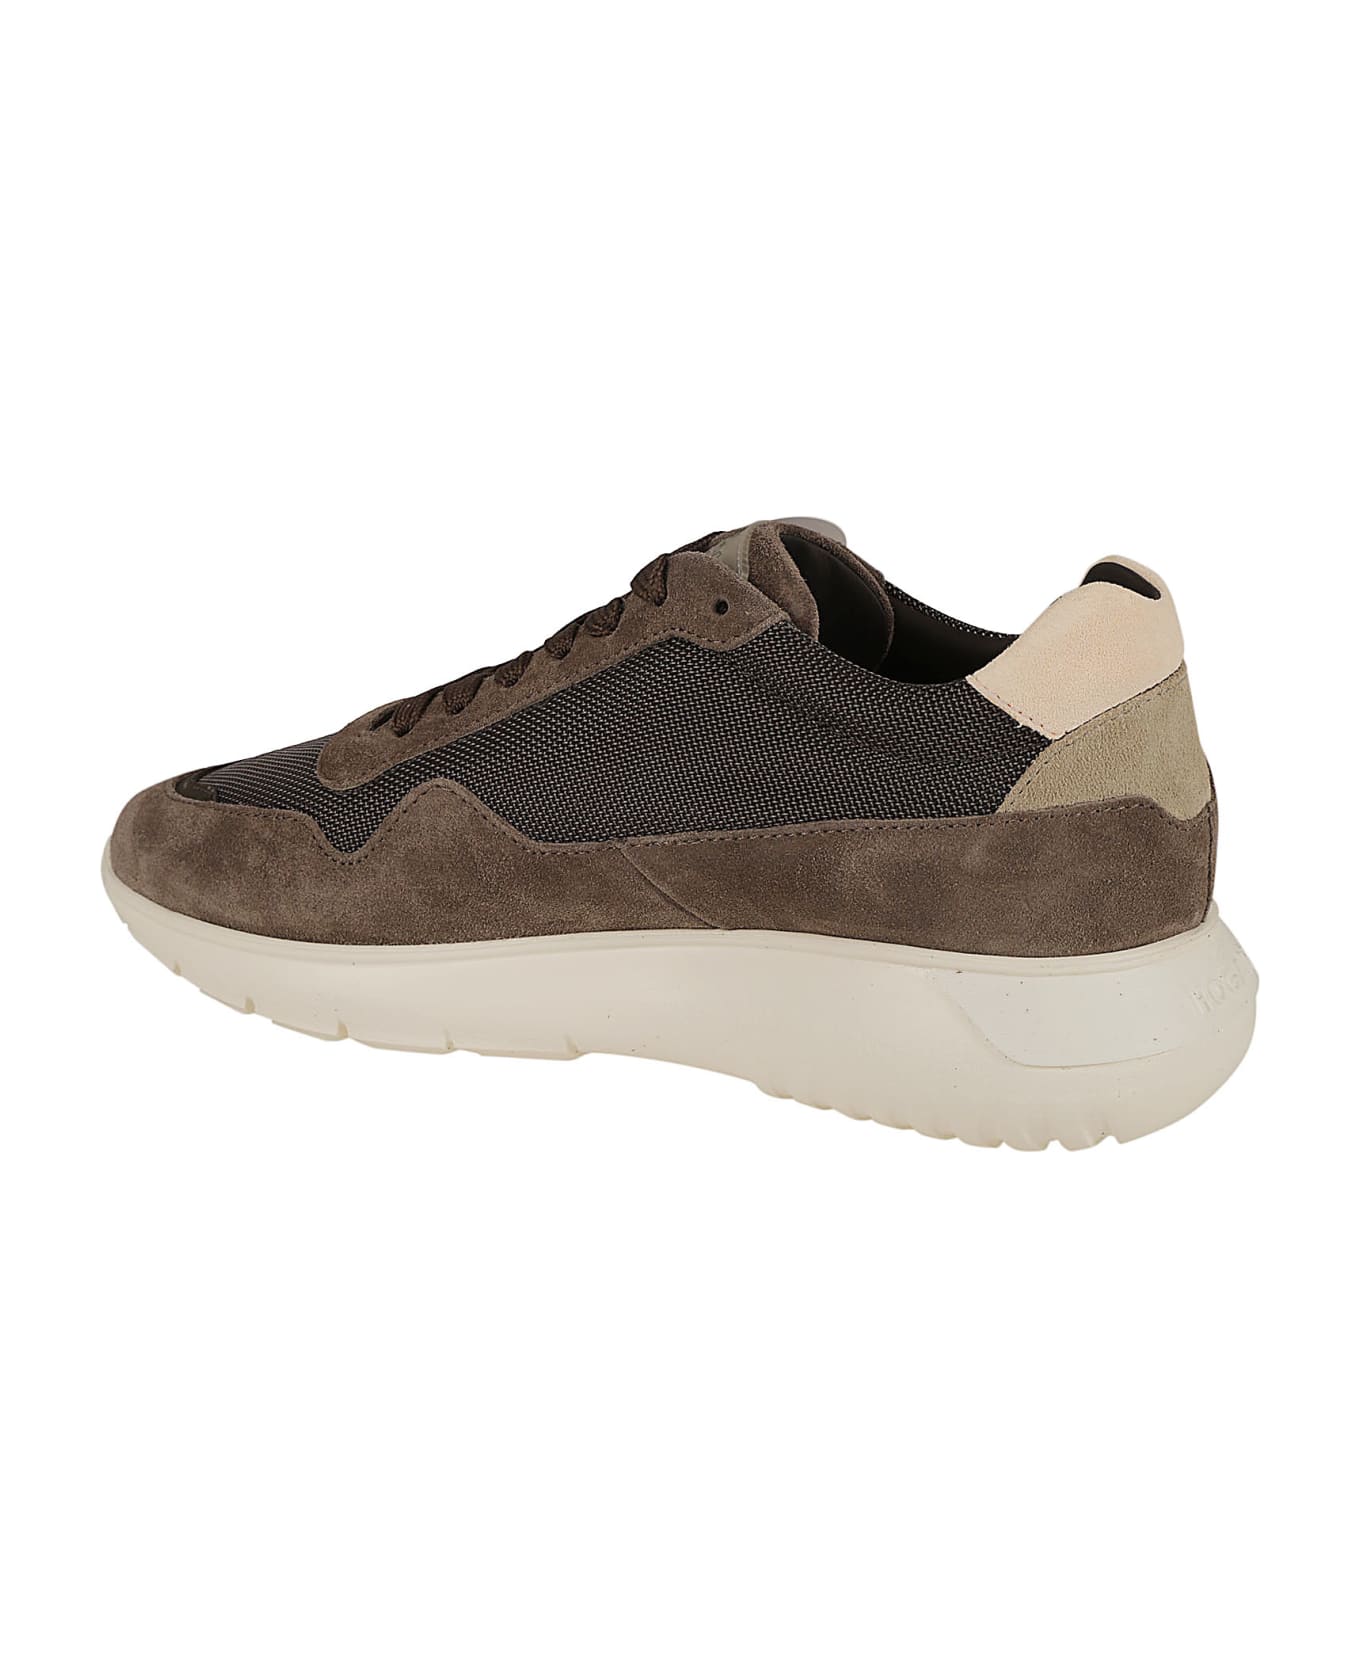 Hogan Interactive3 Sneakers From - F Multi スニーカー